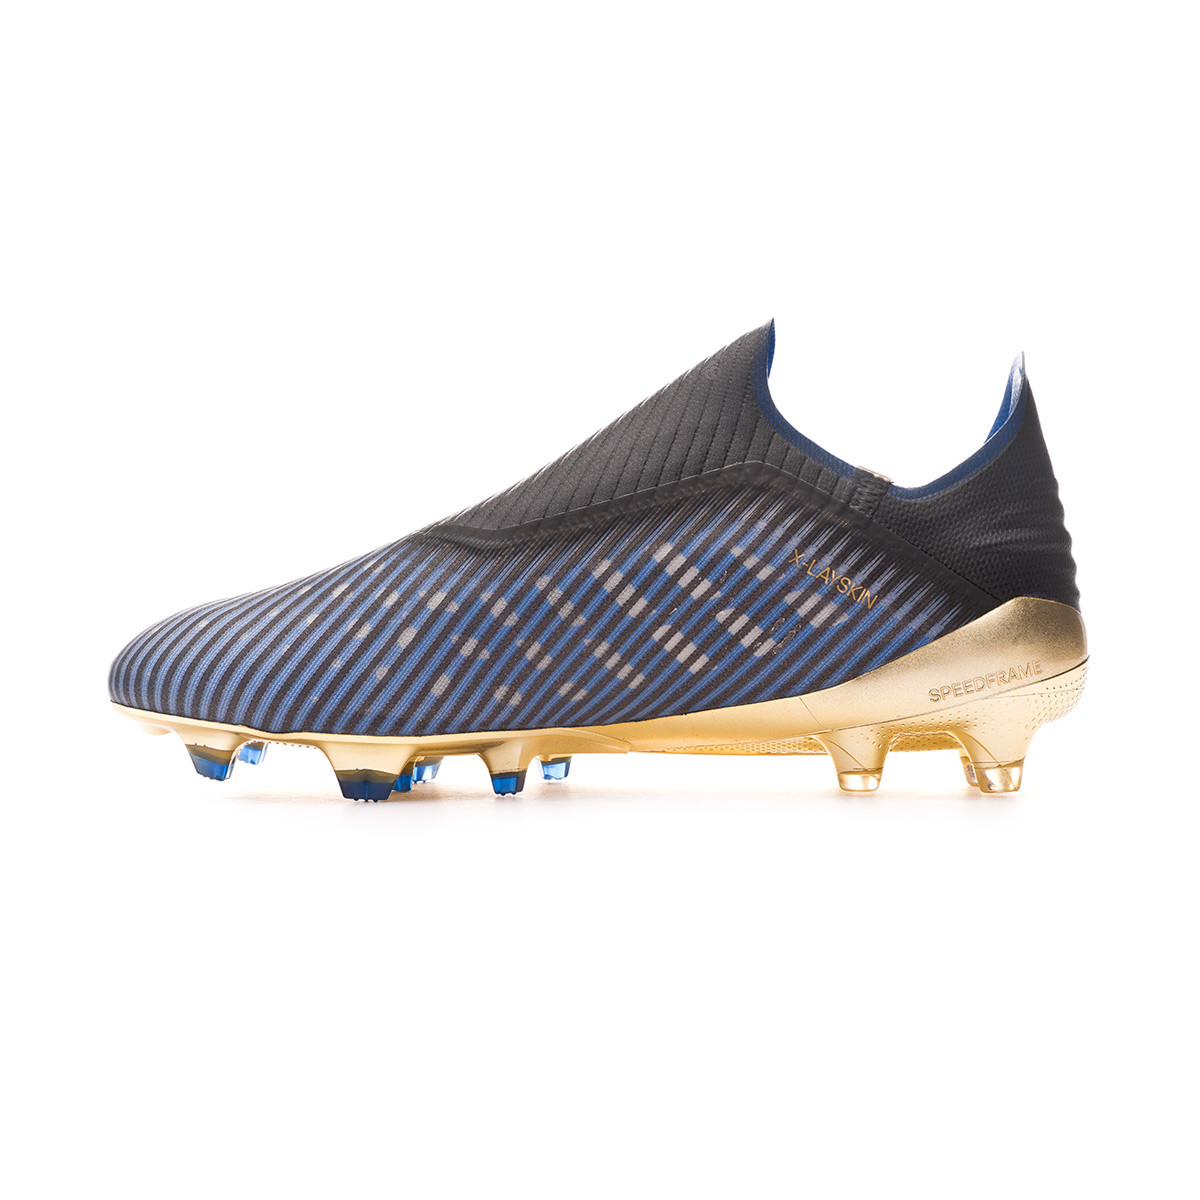 adidas gold soccer boots